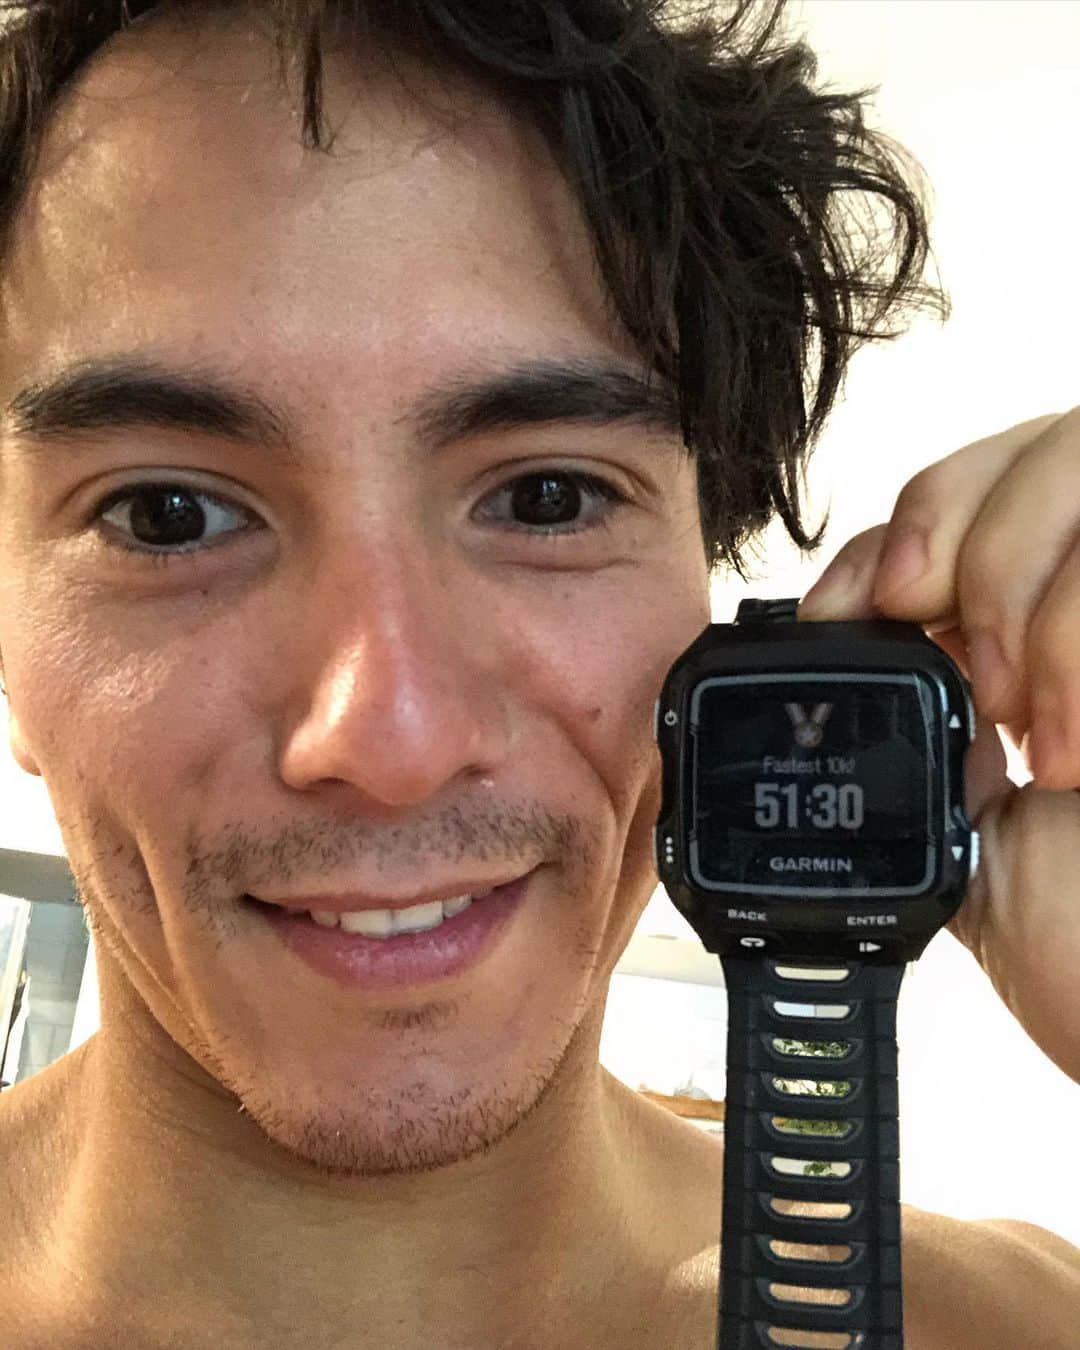 シーン・マコールさんのインスタグラム写真 - (シーン・マコールInstagram)「Just set a 10km personal best and I’m in a “minor” state of euphoria ... actually I’m over the freakin’ moon! 🤯 ⠀⠀⠀⠀⠀⠀⠀⠀⠀ Fun fact: I set this record while only breathing through my nose, I have no idea if it has any training benefits (some quick googling doesn’t show any crazy red-flags for athletes) I just thought it’d be fun and challenging to try, thanks @friz_ 🤜🏽 ⠀⠀⠀⠀⠀⠀⠀⠀⠀ I also didn’t set out this morning with the goal of knocking 4 minutes off my PB, it just kind of happened! 😍 I started with my 5am weekly board meeting with the @ifsclimbing executive board which finished at 06:30. By 06:45 I was out the door 🏃‍♂️ ⠀⠀⠀⠀⠀⠀⠀⠀⠀ Warmed up for 10 minutes running at a lazy pace; the prescribed run today was 4 sets of 10 (minutes) with a minute walk in between each set. I knew it was 53 minutes but didn’t think much of it. It wasn’t until my last walk from 42:00 - 43:00 that I realized I was at the 8km mark and if I did two 5-minute km’s I’d beat my record of 55:30! ⠀⠀⠀⠀⠀⠀⠀⠀⠀ Setting records is a huge motivator for me and I’ll admit those last two km’s were very hard. I hit 10k at 52:08 and realized I still had a minute left in the set. I also knew my warm up at the beginning was quite slow and if my watch was smart it would pick the fastest 10k from my run. I kept sprinting for the last minute and finally opened my mouth to breathe at the very end. The feeling was magical, literally could get air into my lungs 3x faster 😂 ⠀⠀⠀⠀⠀⠀⠀⠀⠀ I walked the last bit to cool down, getting my heart back to normal, and that’s when I realized I was dreaming, it was 7am and my alarm was going off. No I’m jk, I actually did the run, thanks for staying to the end and putting a 🍔 in the comments 🙏🏽 ⠀⠀⠀⠀⠀⠀⠀⠀⠀ ⠀⠀⠀⠀⠀⠀⠀⠀⠀ ⠀⠀⠀⠀⠀⠀⠀⠀⠀ ⠀⠀⠀⠀⠀⠀⠀⠀⠀ ⠀⠀⠀⠀⠀⠀⠀⠀⠀ @adidasterrex | @scarpana | @joerockheads | @verticalartclimbing | @flashedclimbing | @perfect_descent | @CANFund | @visaca #verticalart #CANFund #TeamVisa #climbing #train #canada #athlete #sports #power #fitness #work #workhard #workout #strength #ninja #gym #fun #challenge #running #runner #run #pb」5月29日 2時28分 - mccollsean